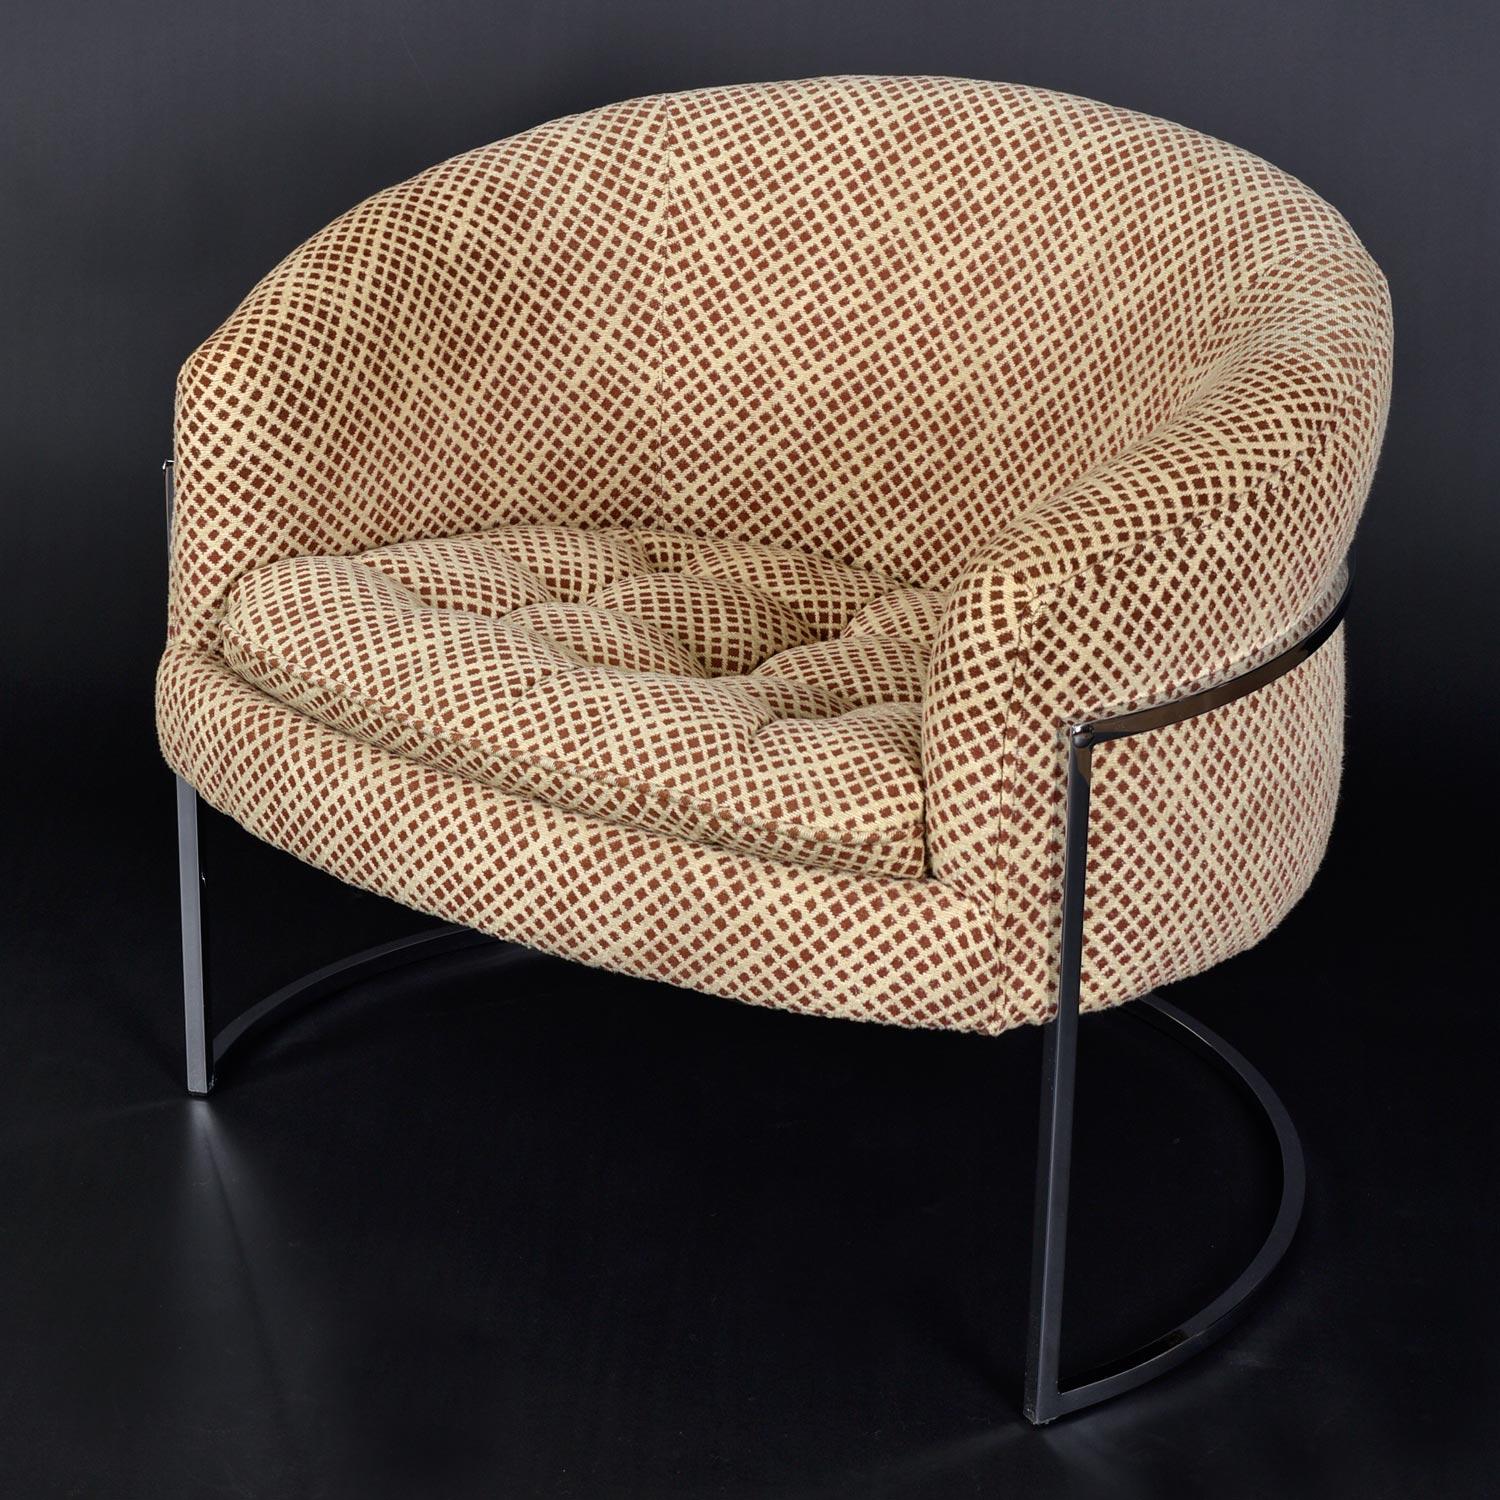 Comfort is king with this all original 1970s tub chair. The semi-circular shape starts with a lower pitch at the arm and escalates to a greater height at the backrest. This gentle pitch of the arms culminating to the back follows the natural form of